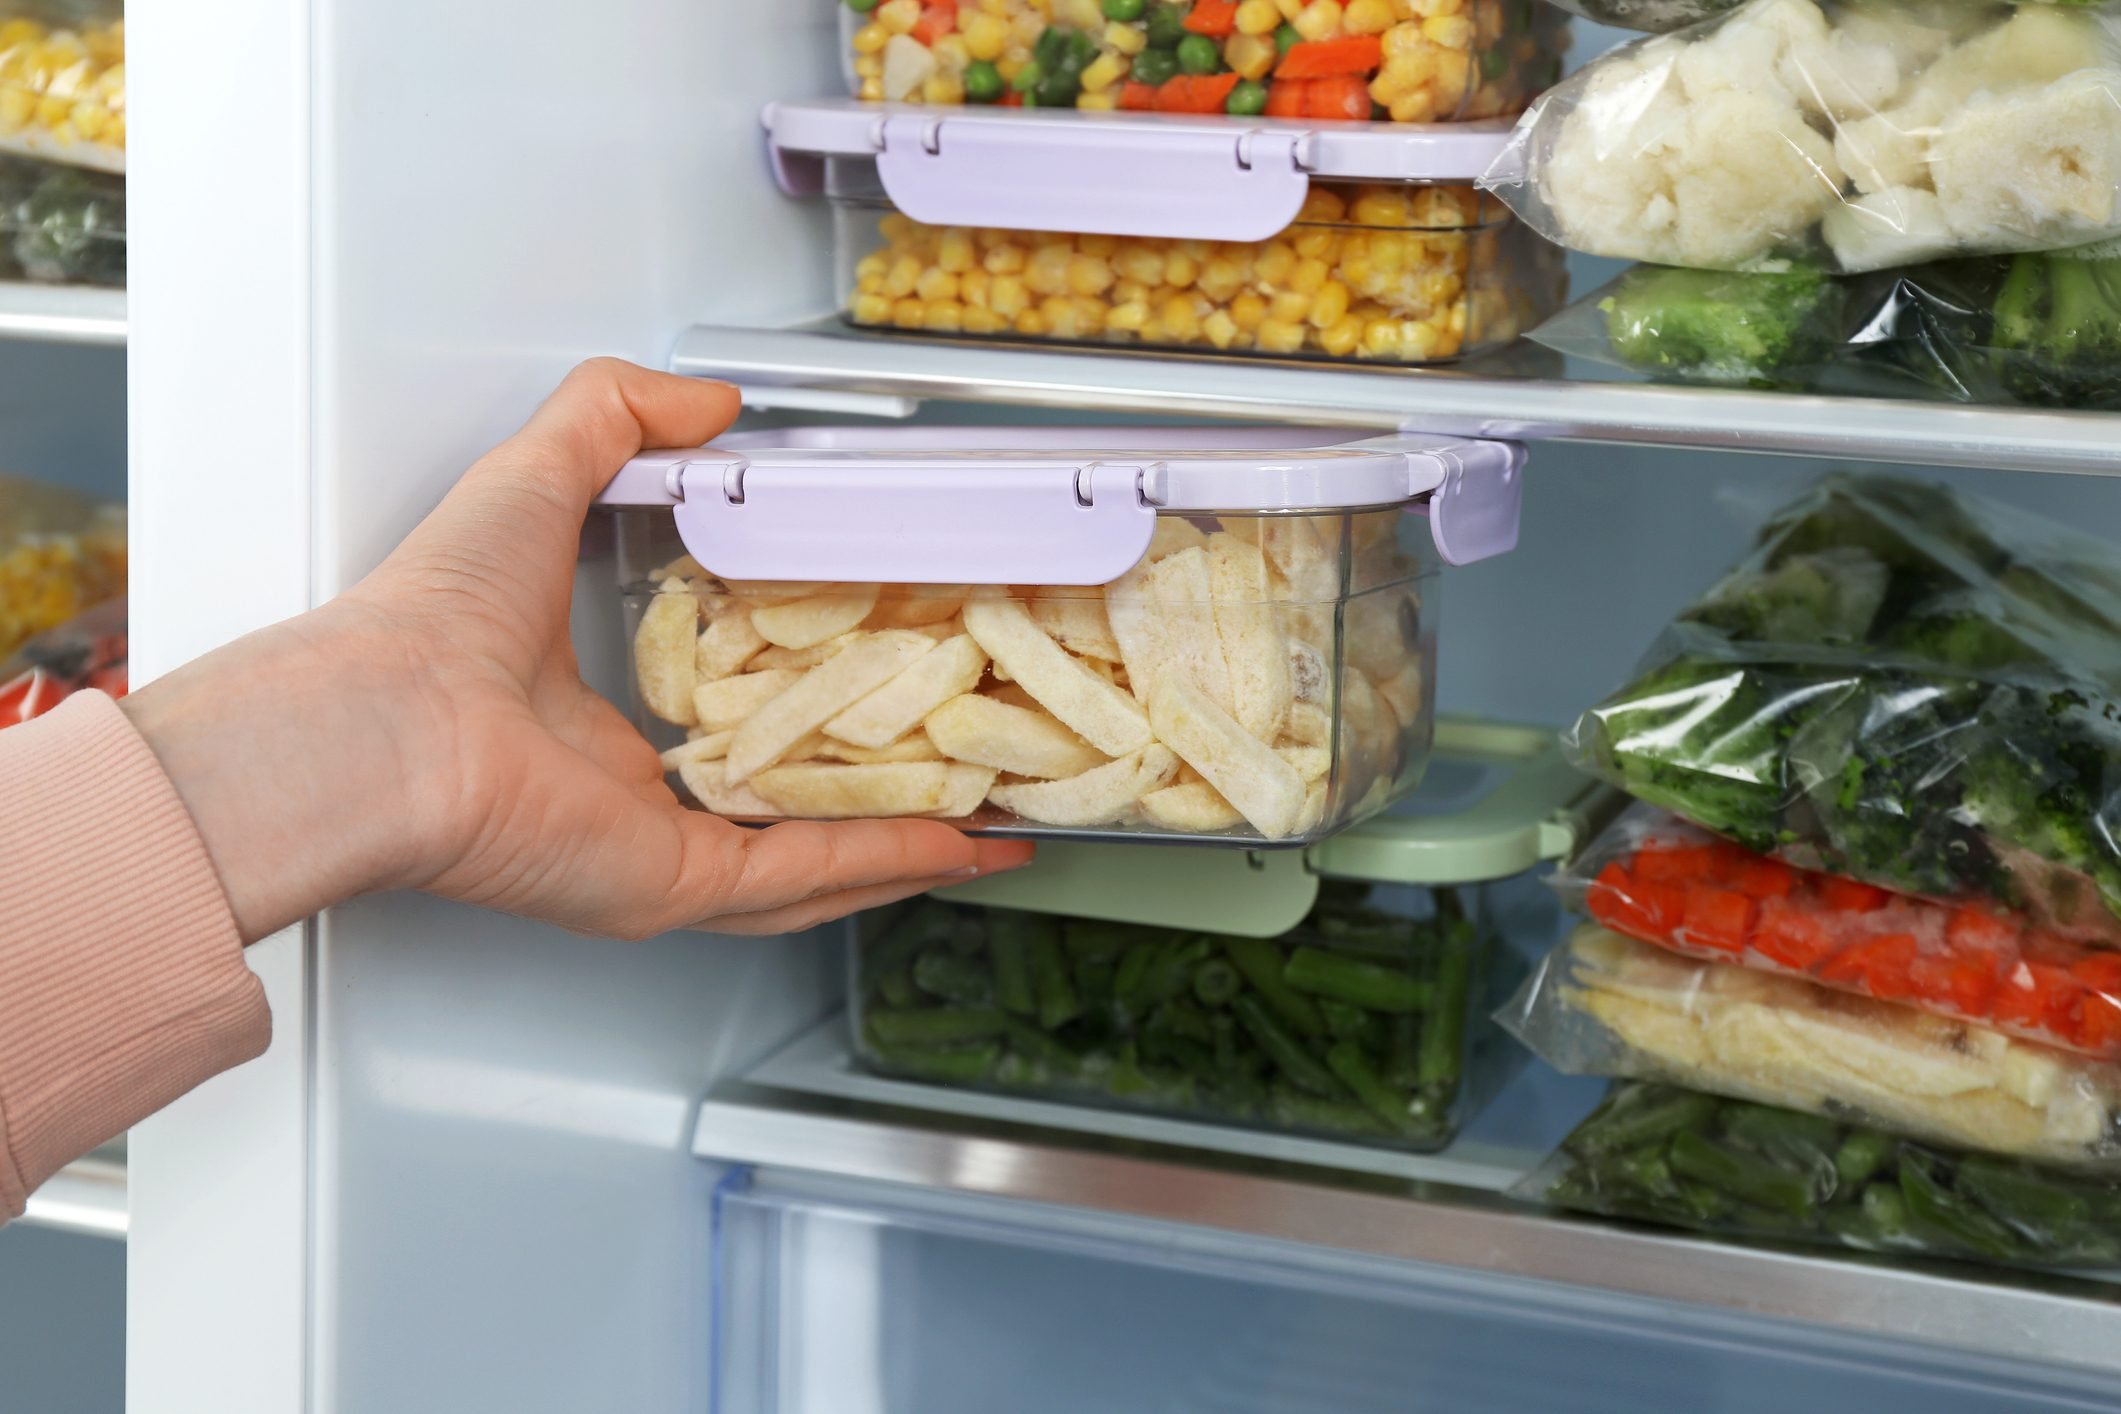 Best Refrigerator Organizers Available on  – SheKnows